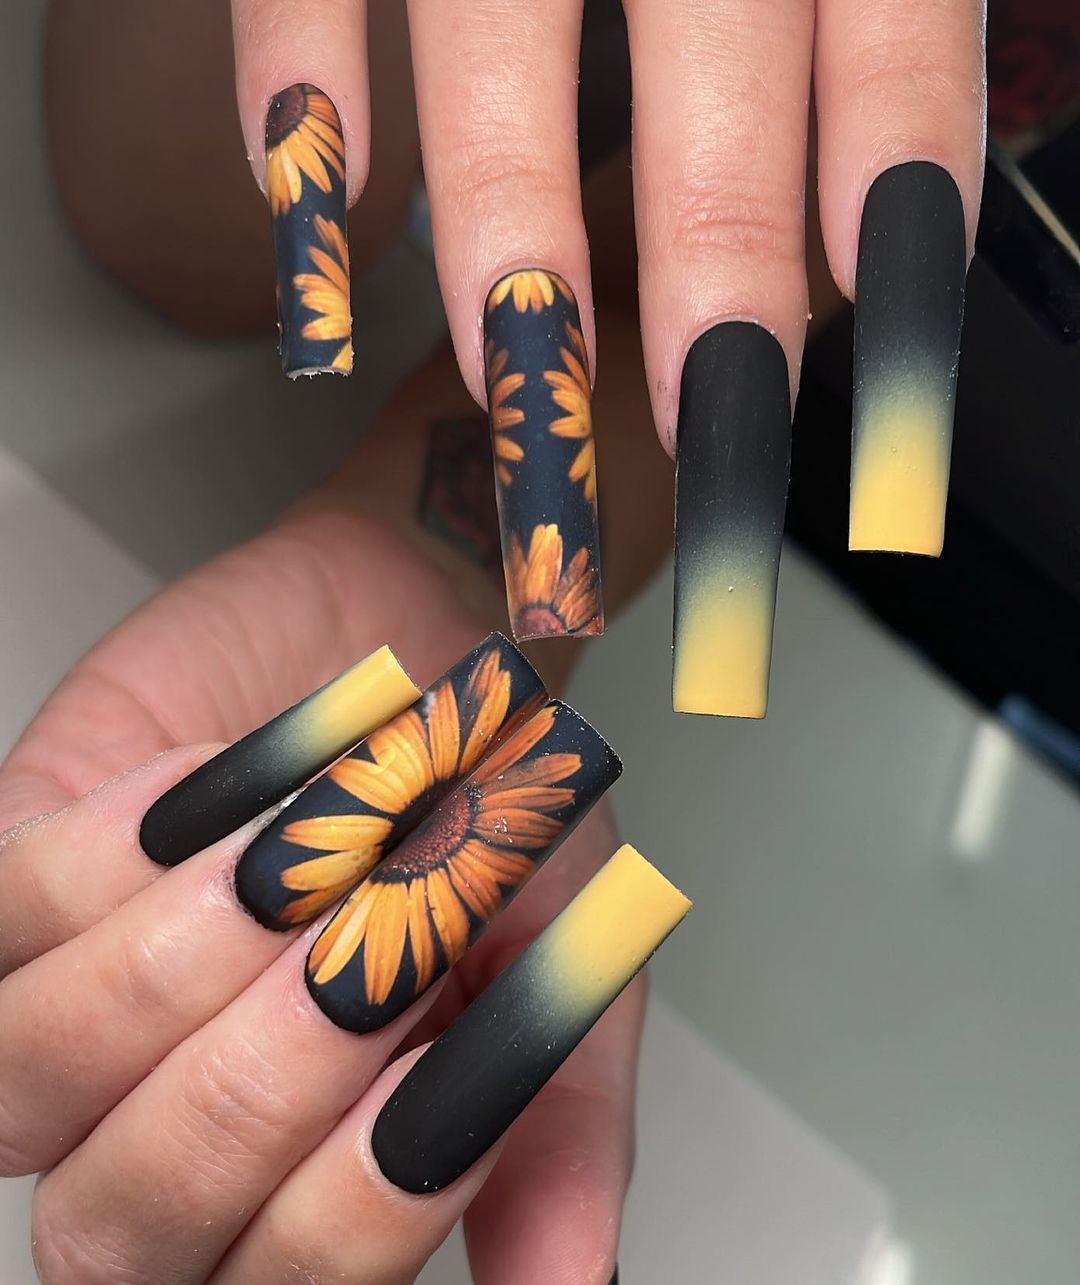 11 Blooming Sunflower Nail Designs to Brighten Your Day - Hairstyle